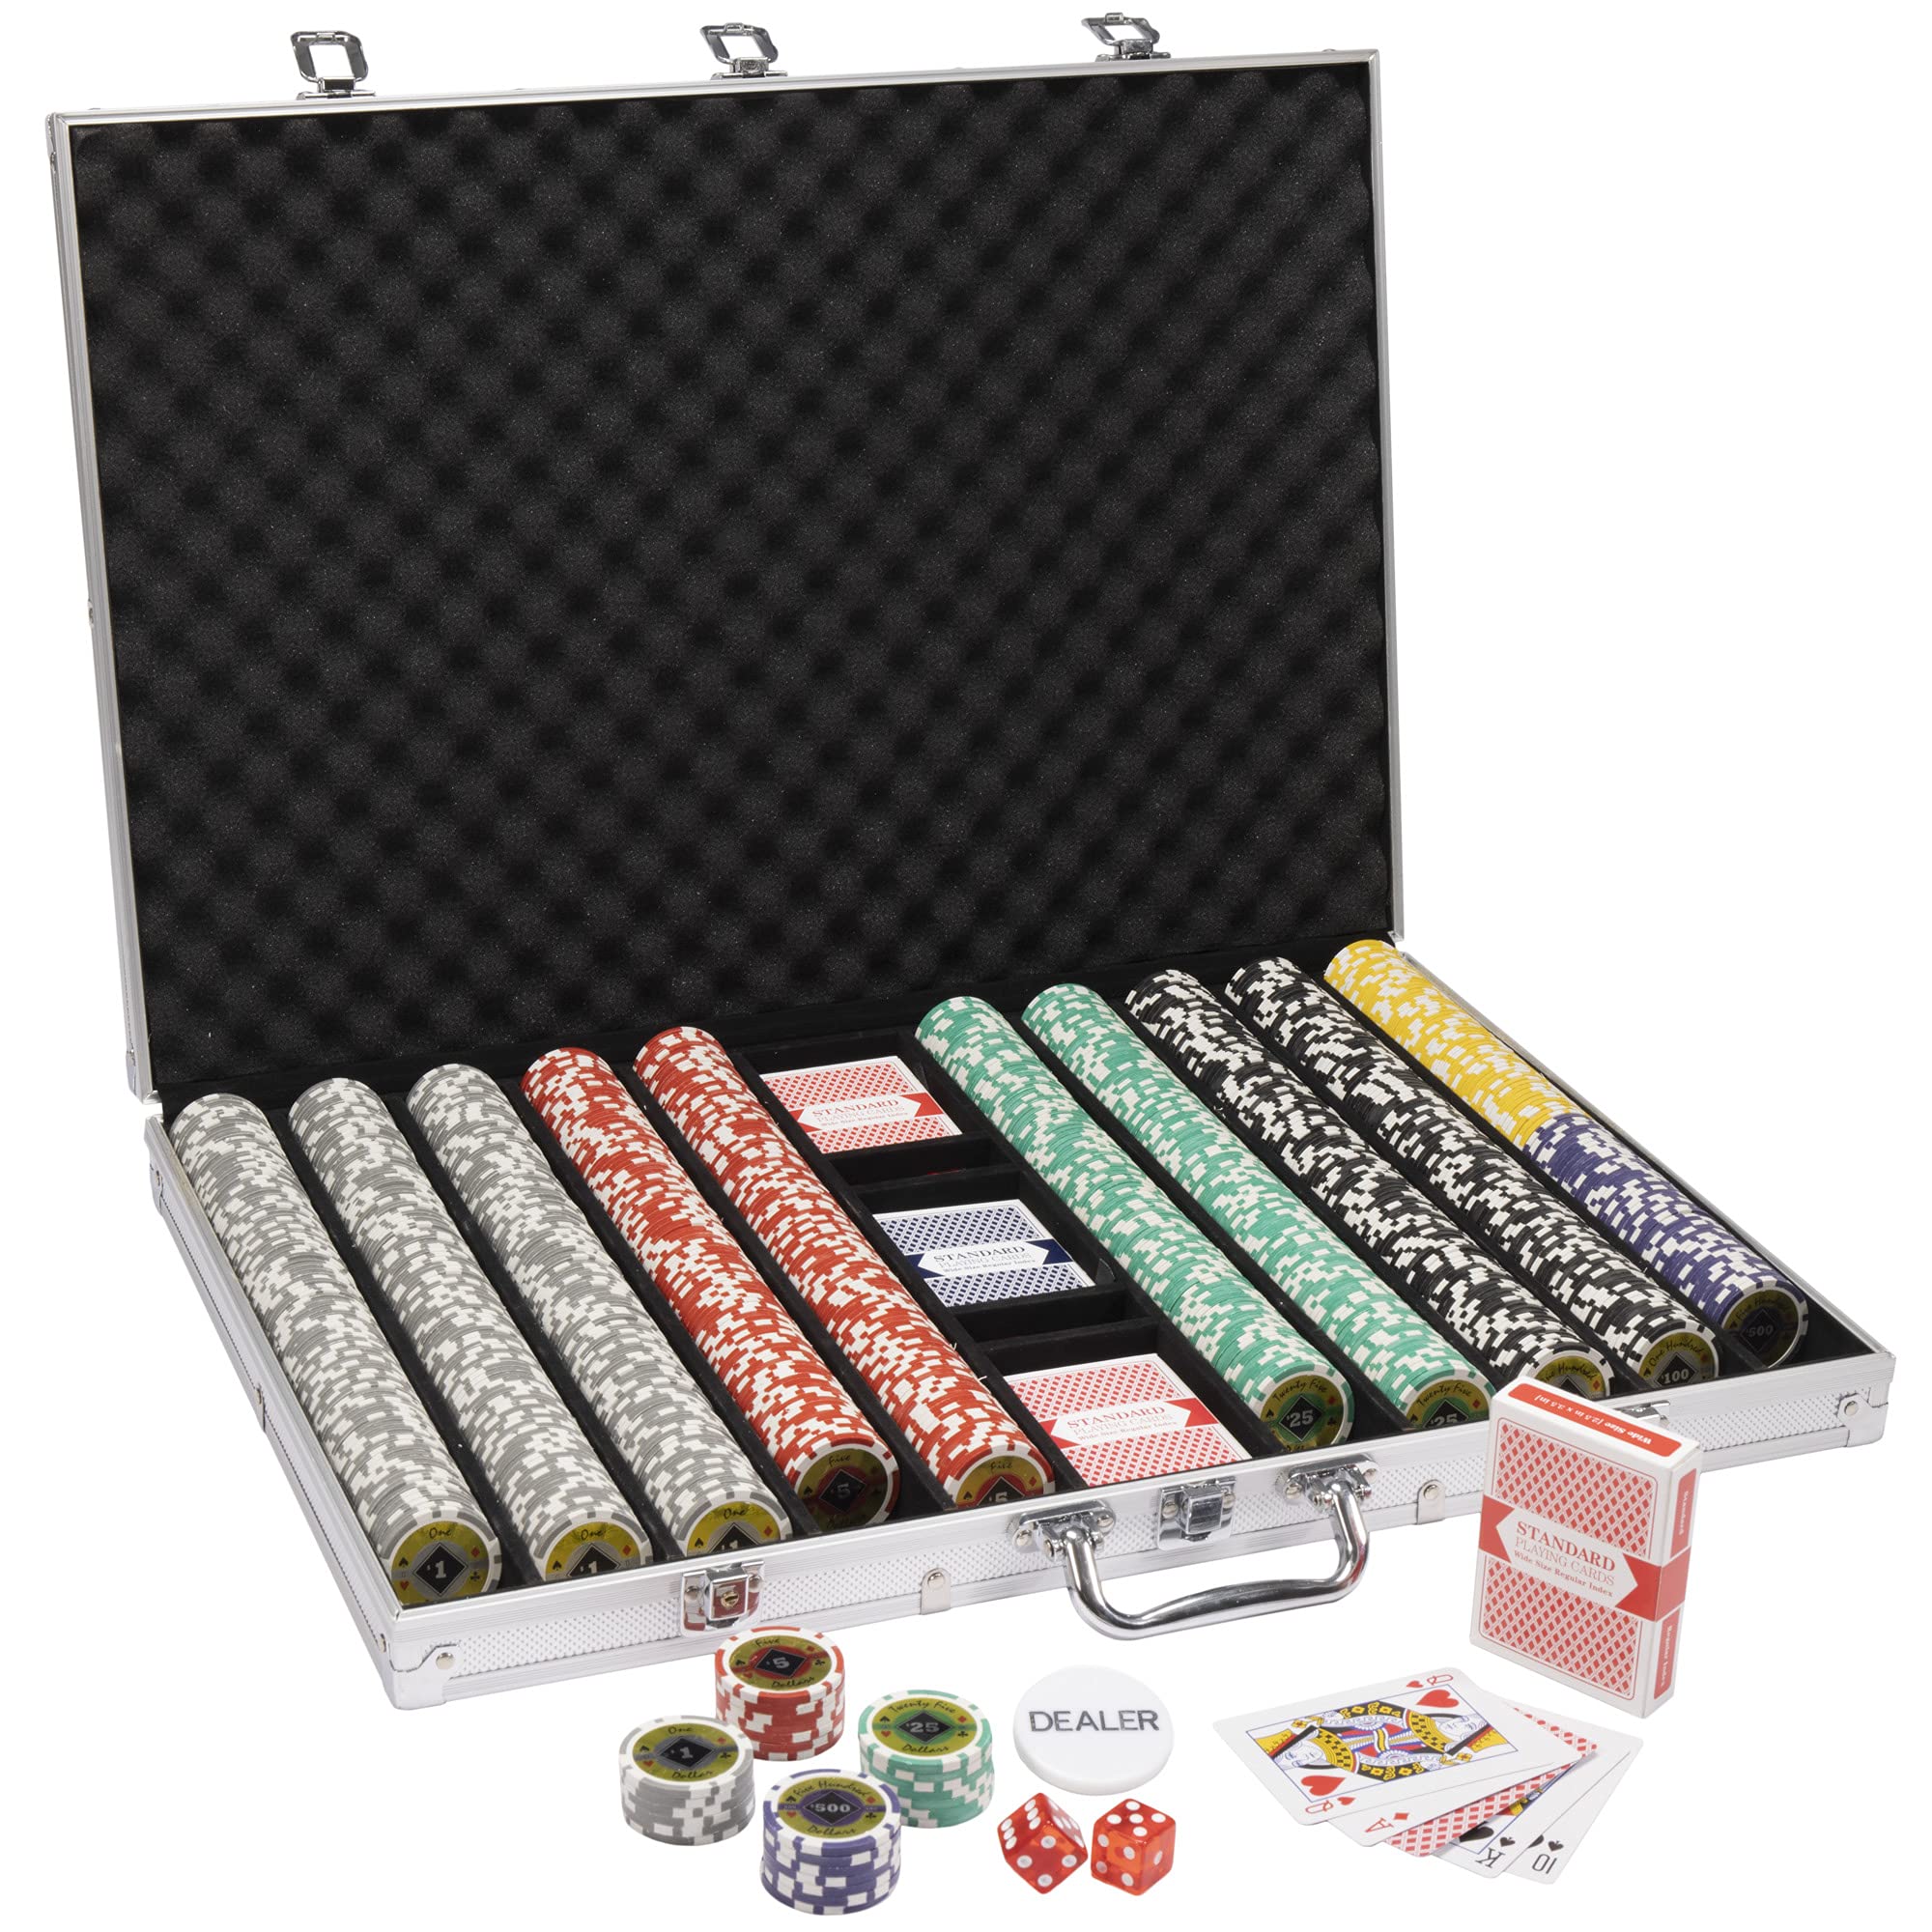 Black Diamond 14-gram Holo Inlay Poker Chip Set in Aluminum Case (1000 Count) - Clay Composite